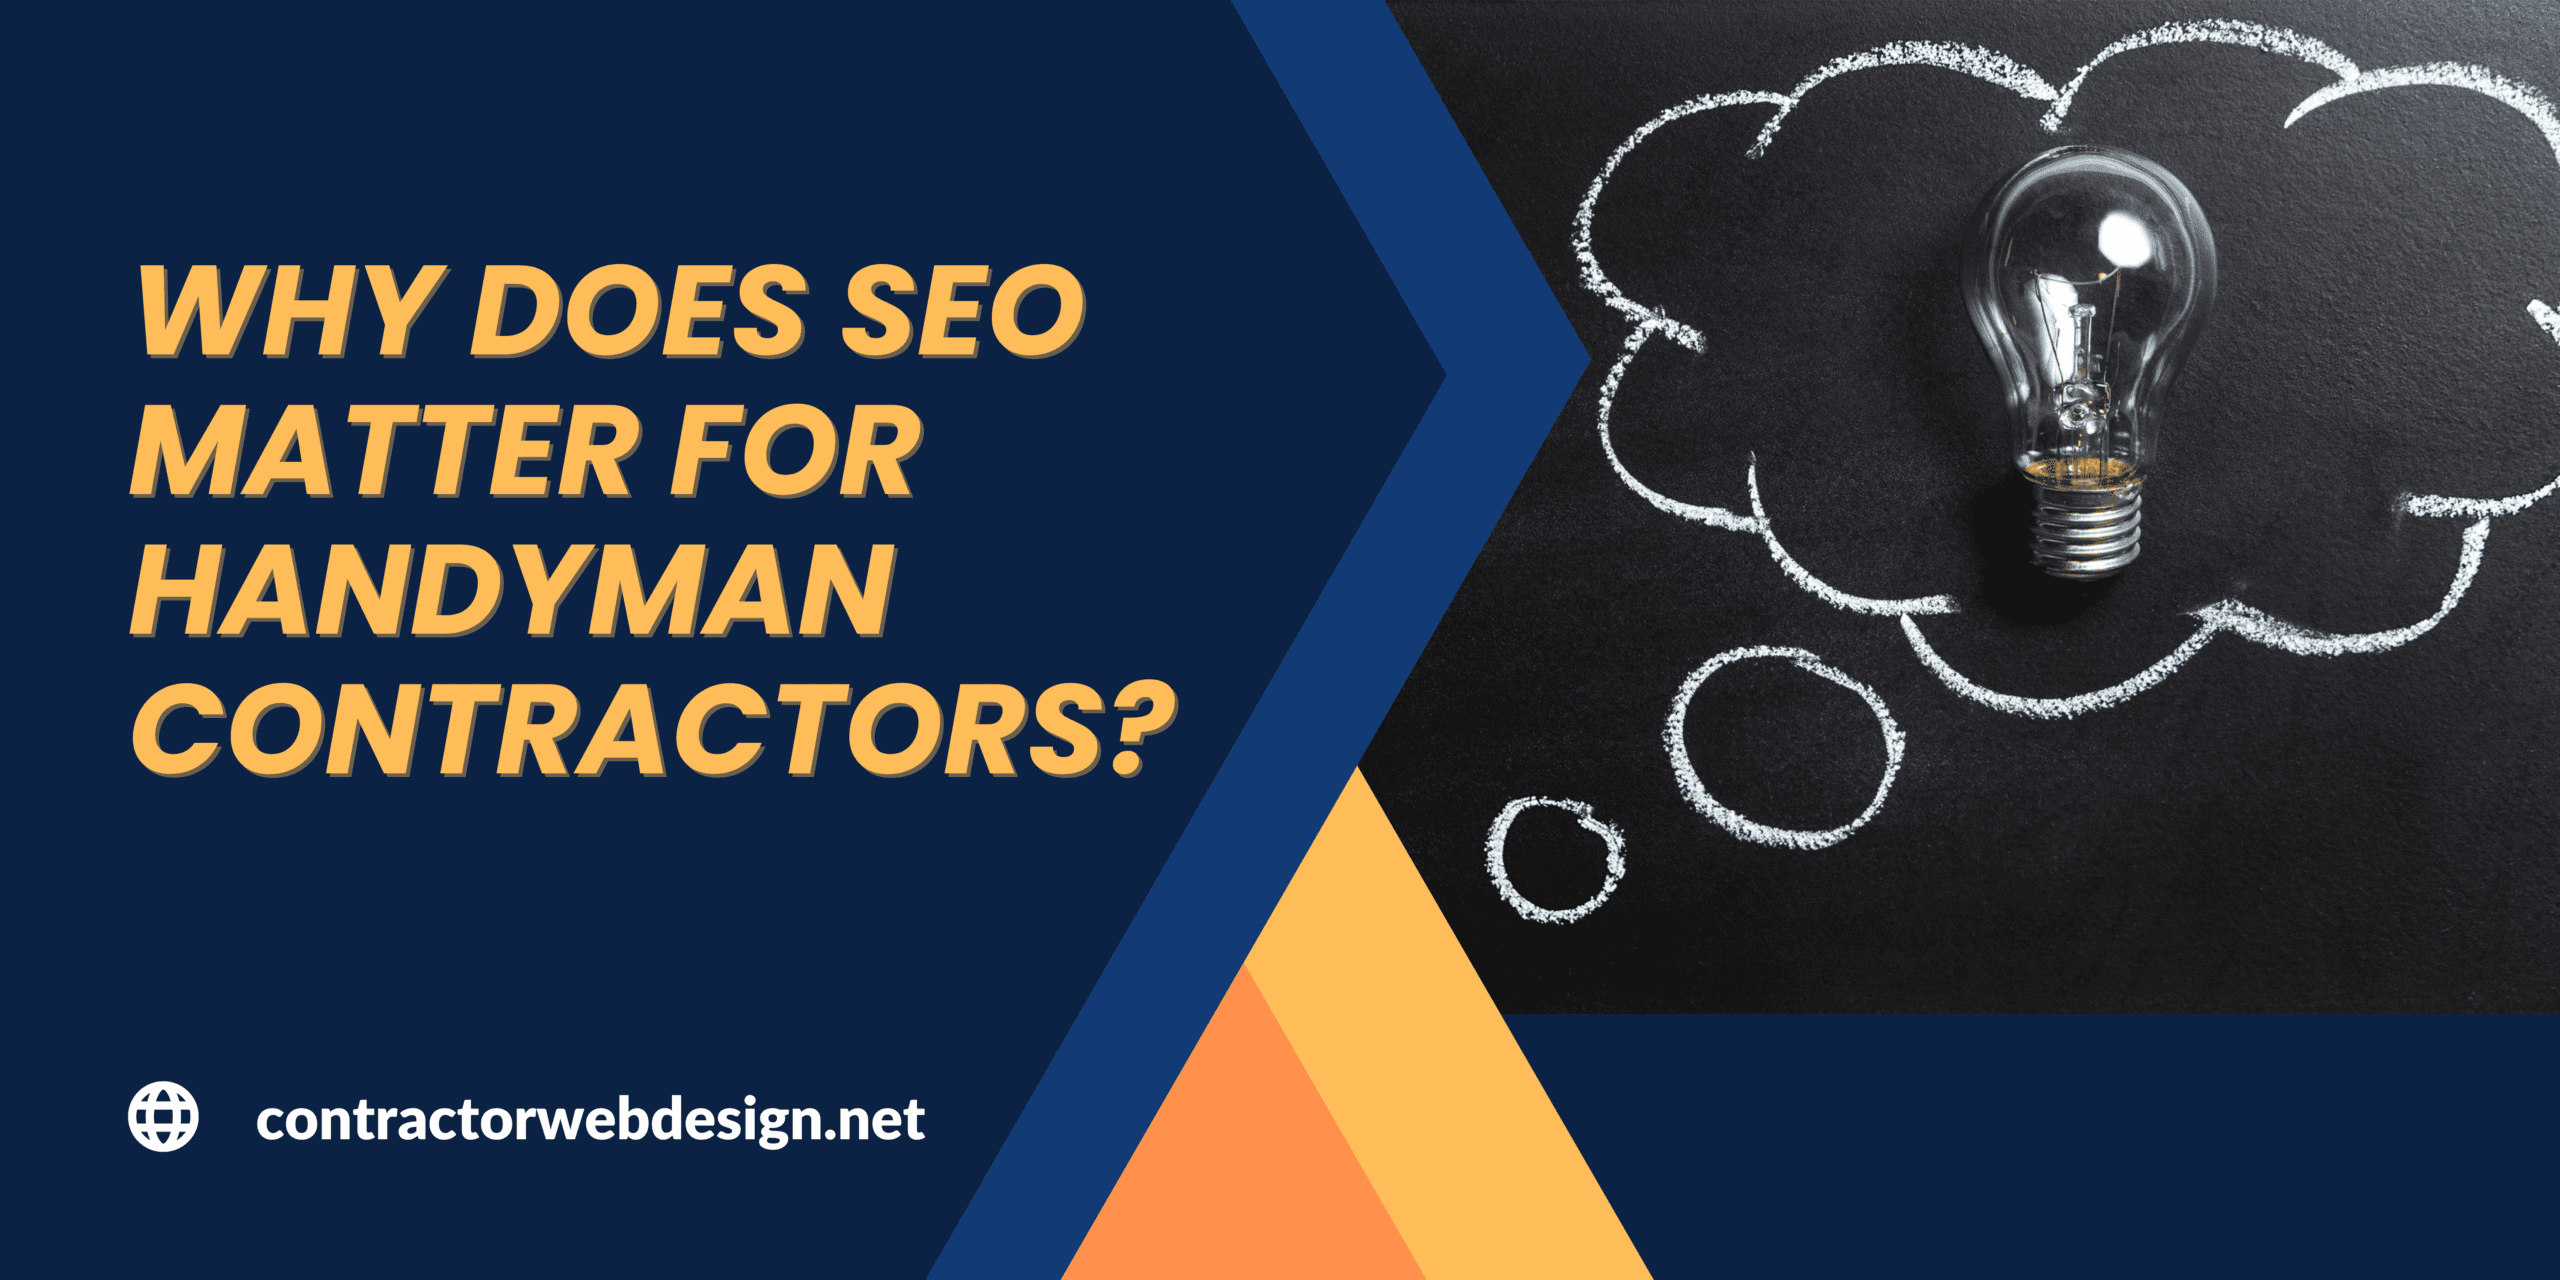 Why does SEO matter for Handyman Contractors?